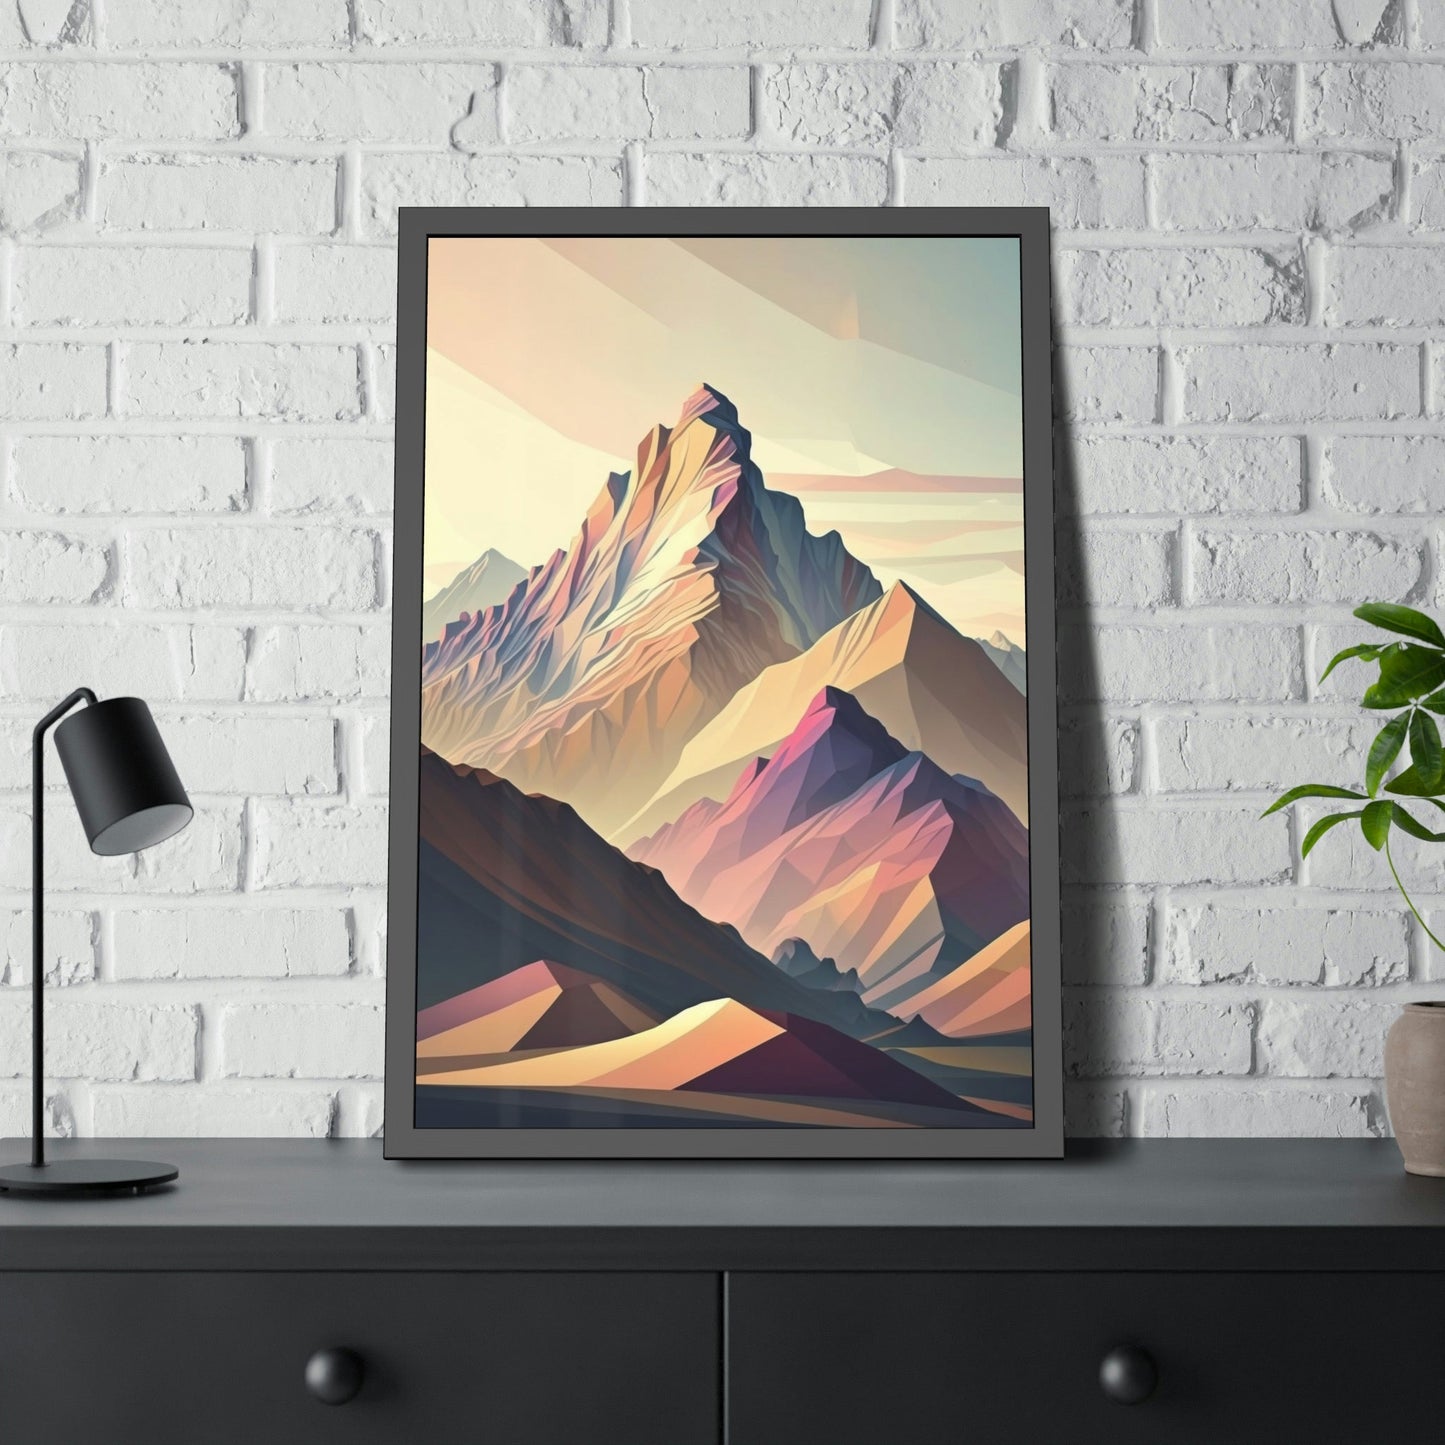 Natures Natural Masterpiece: A Mountain Range on Canvas